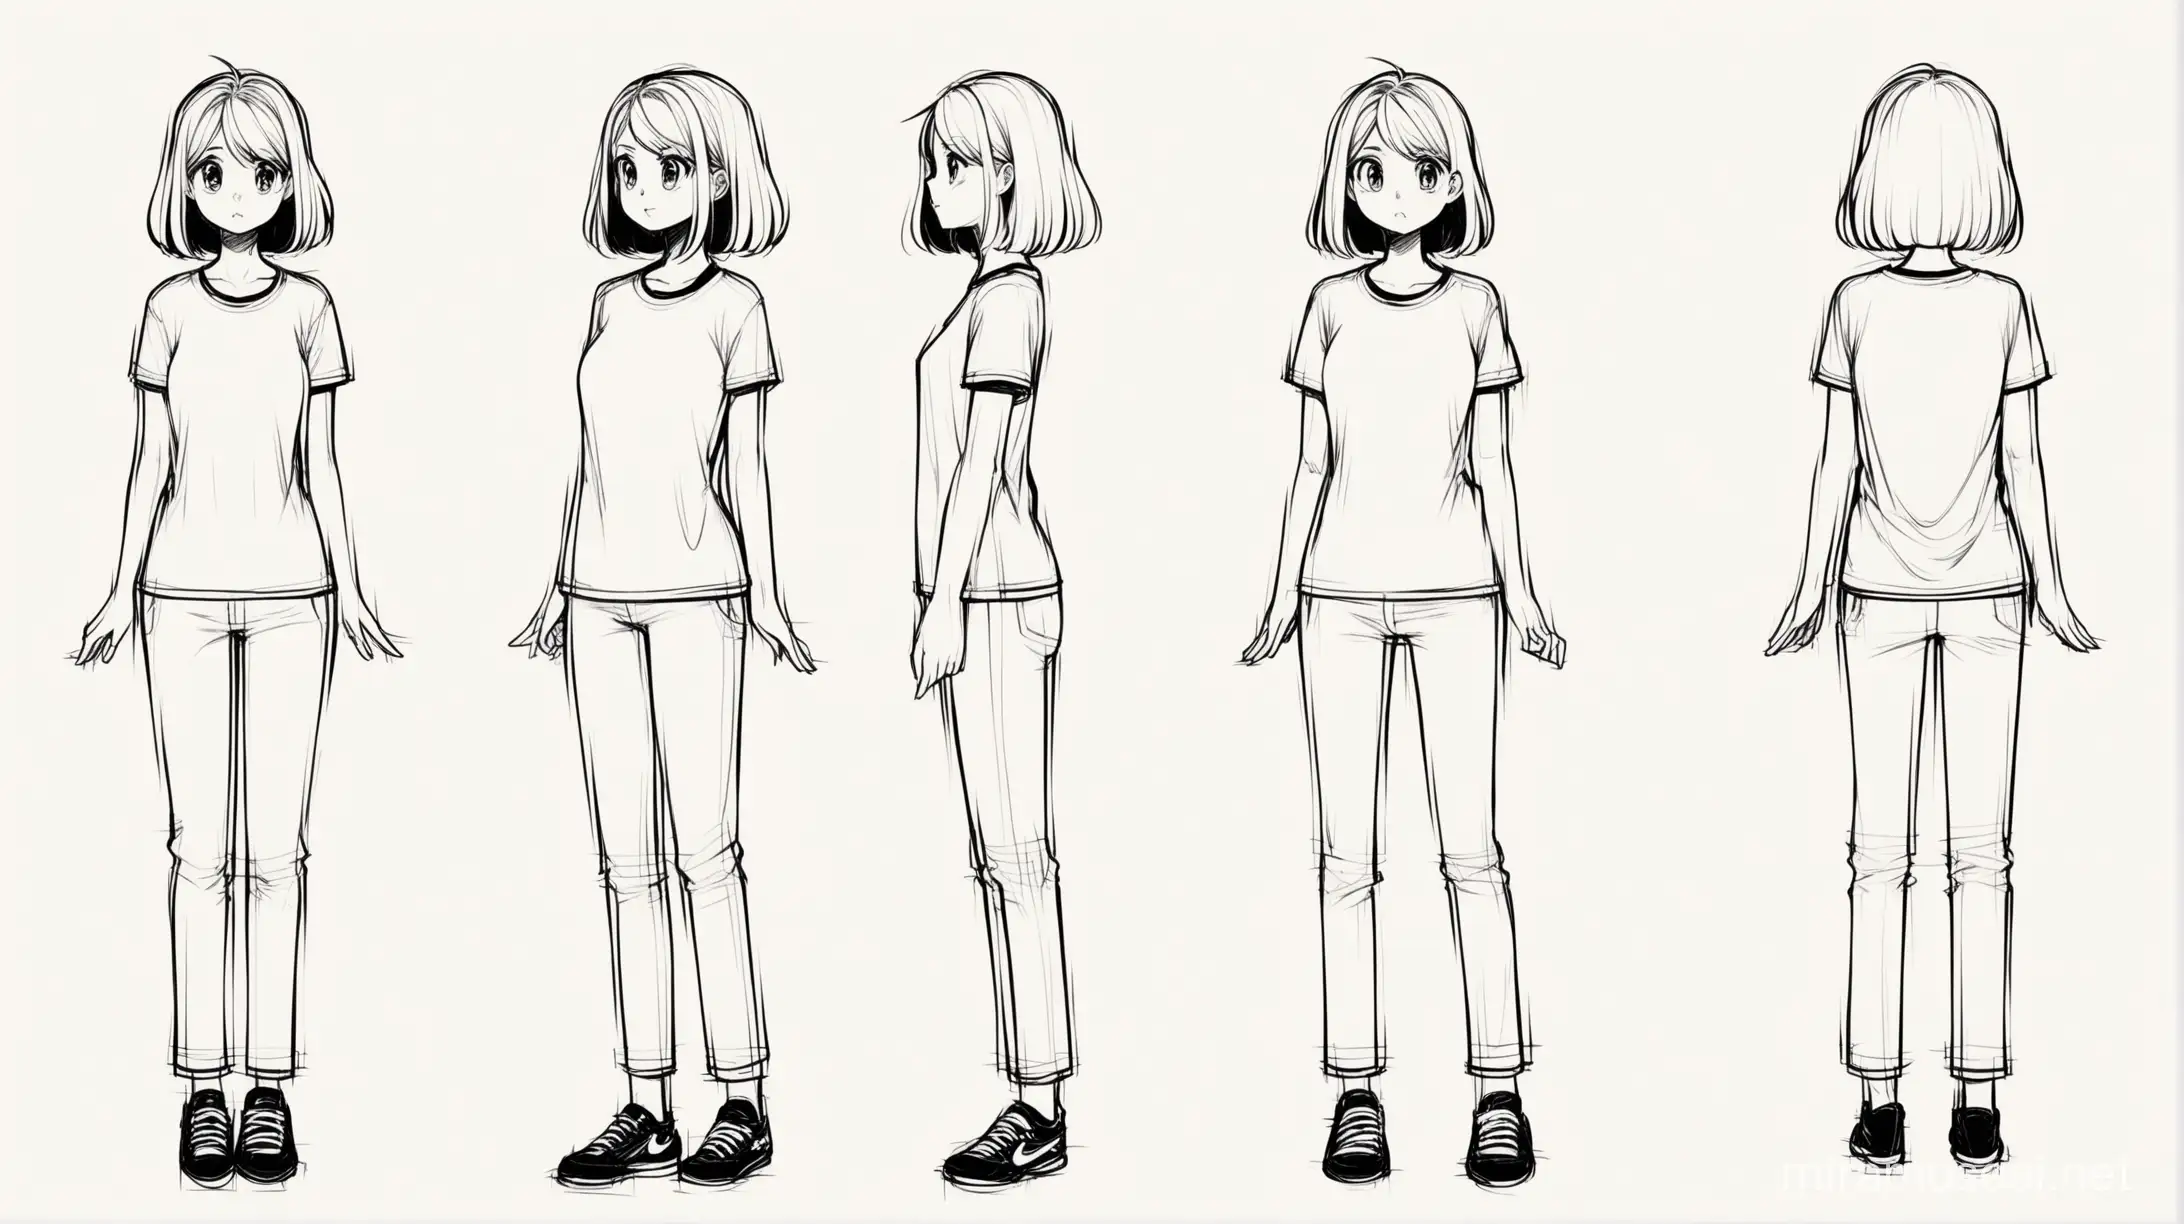 Versatile Linear Black and White Drawings of Girl Character with Unique Cartoon Hair and Casual Outfit